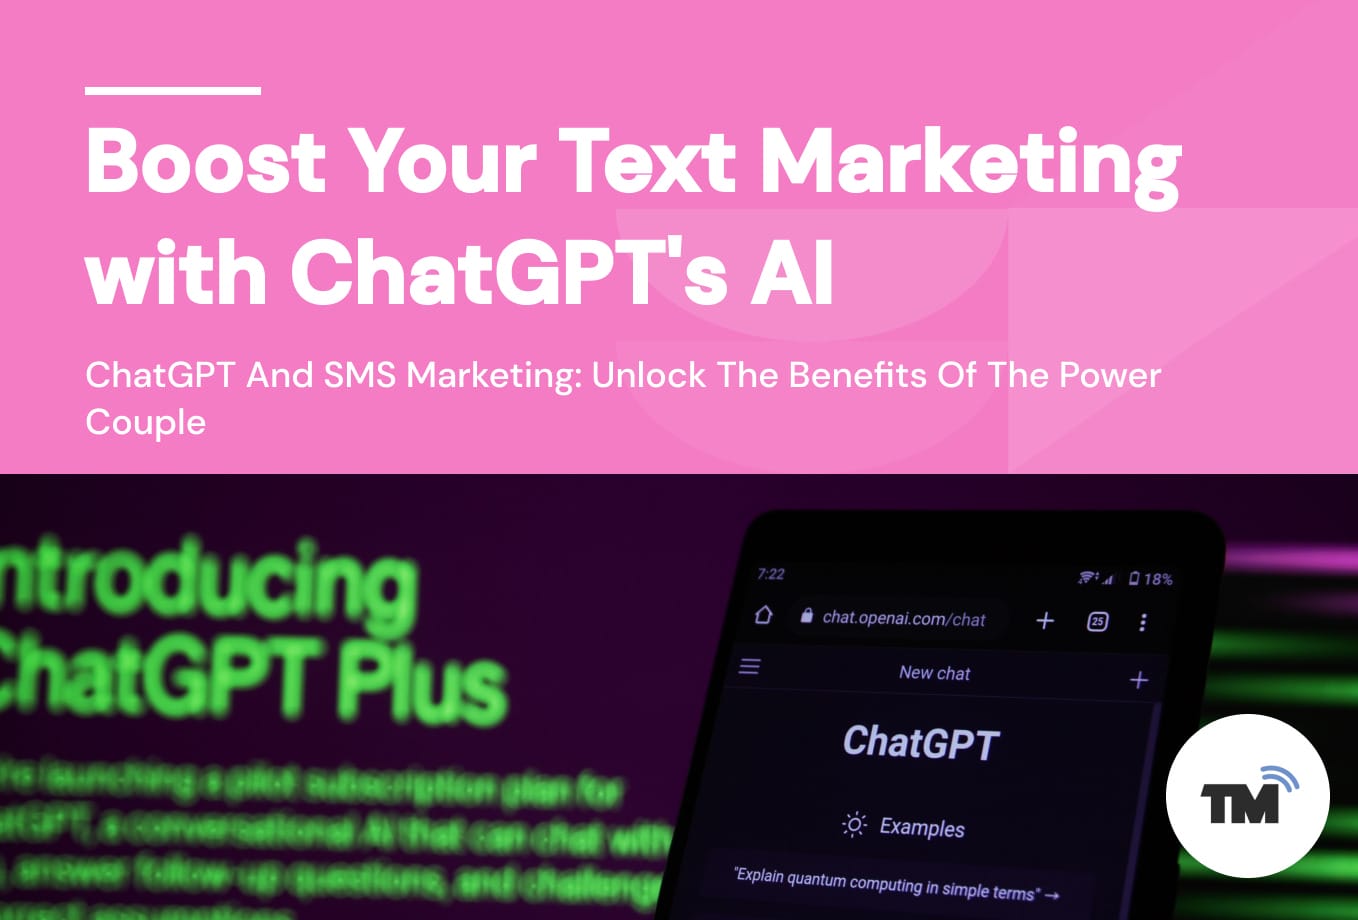 ChatGPT And SMS Marketing: Unlock The Benefits Of The Power Couple